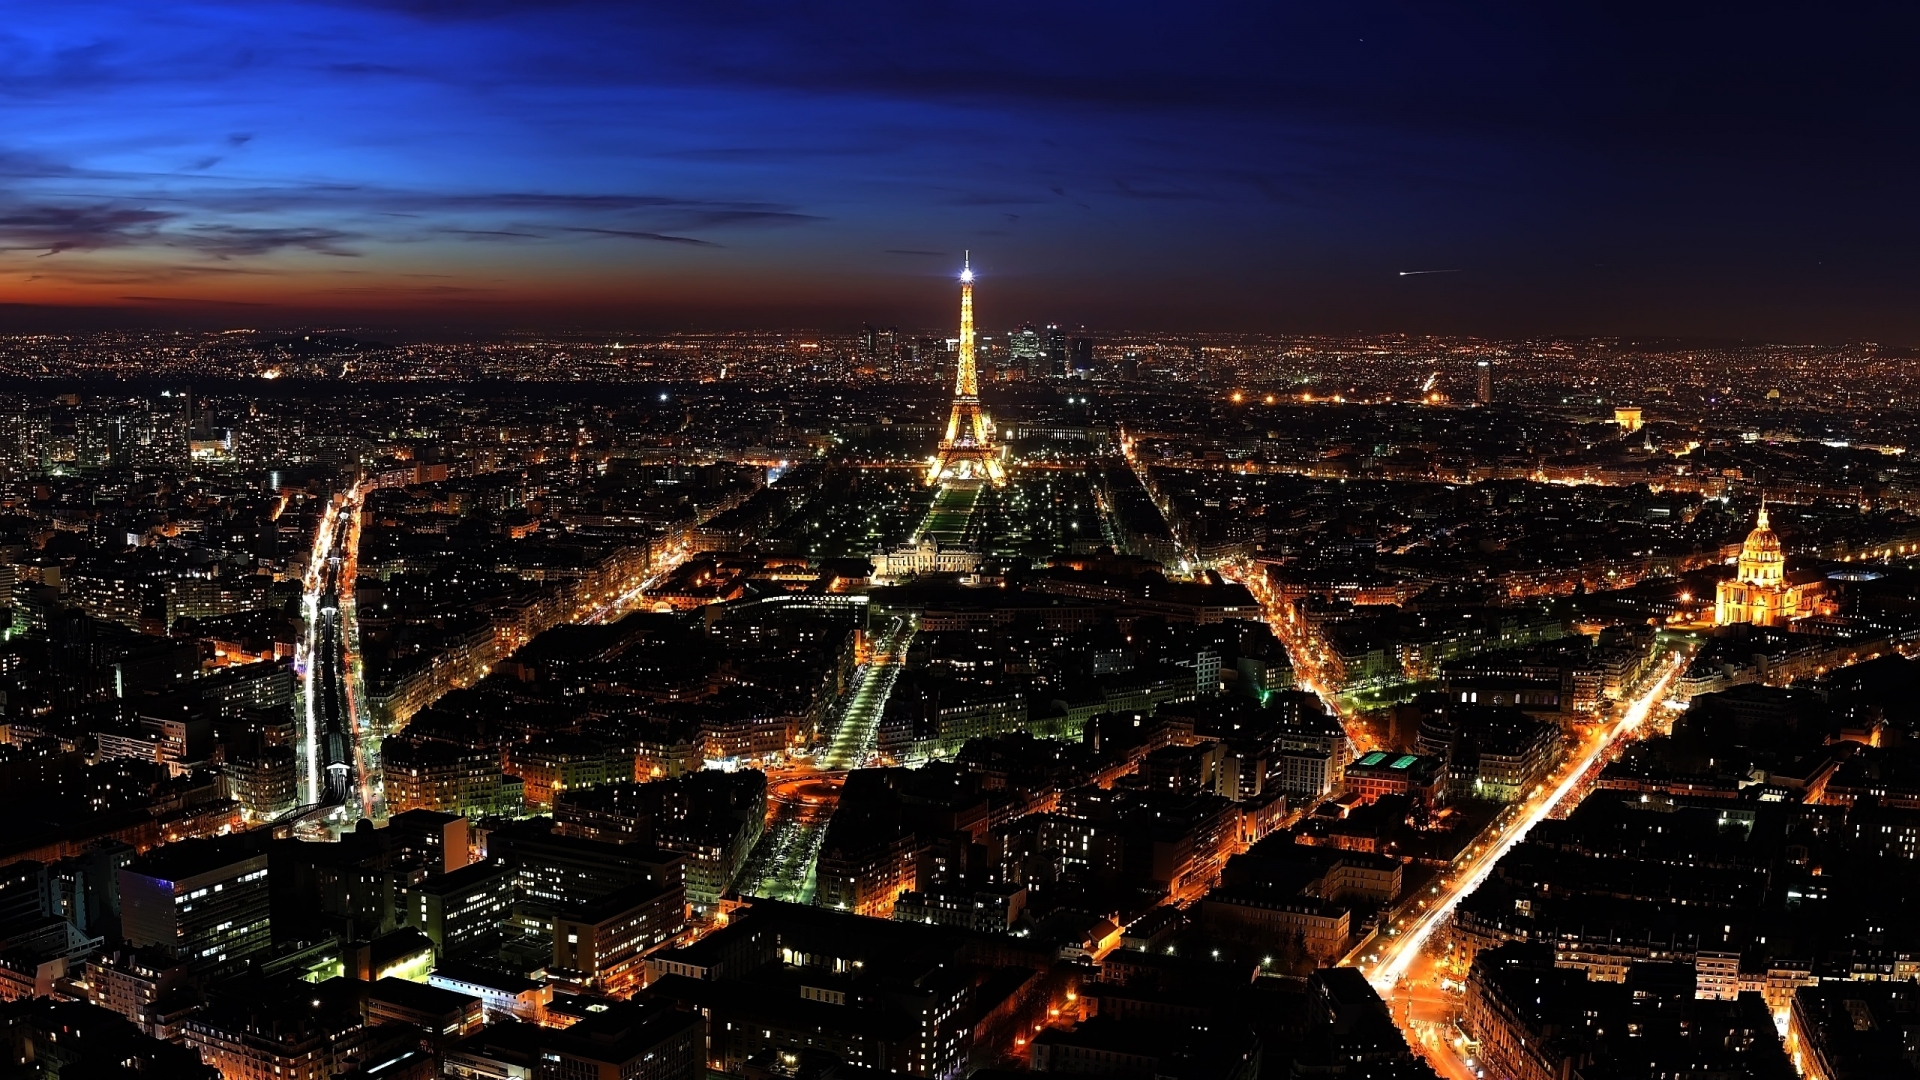 Nigh in Paris for 1920 x 1080 HDTV 1080p resolution